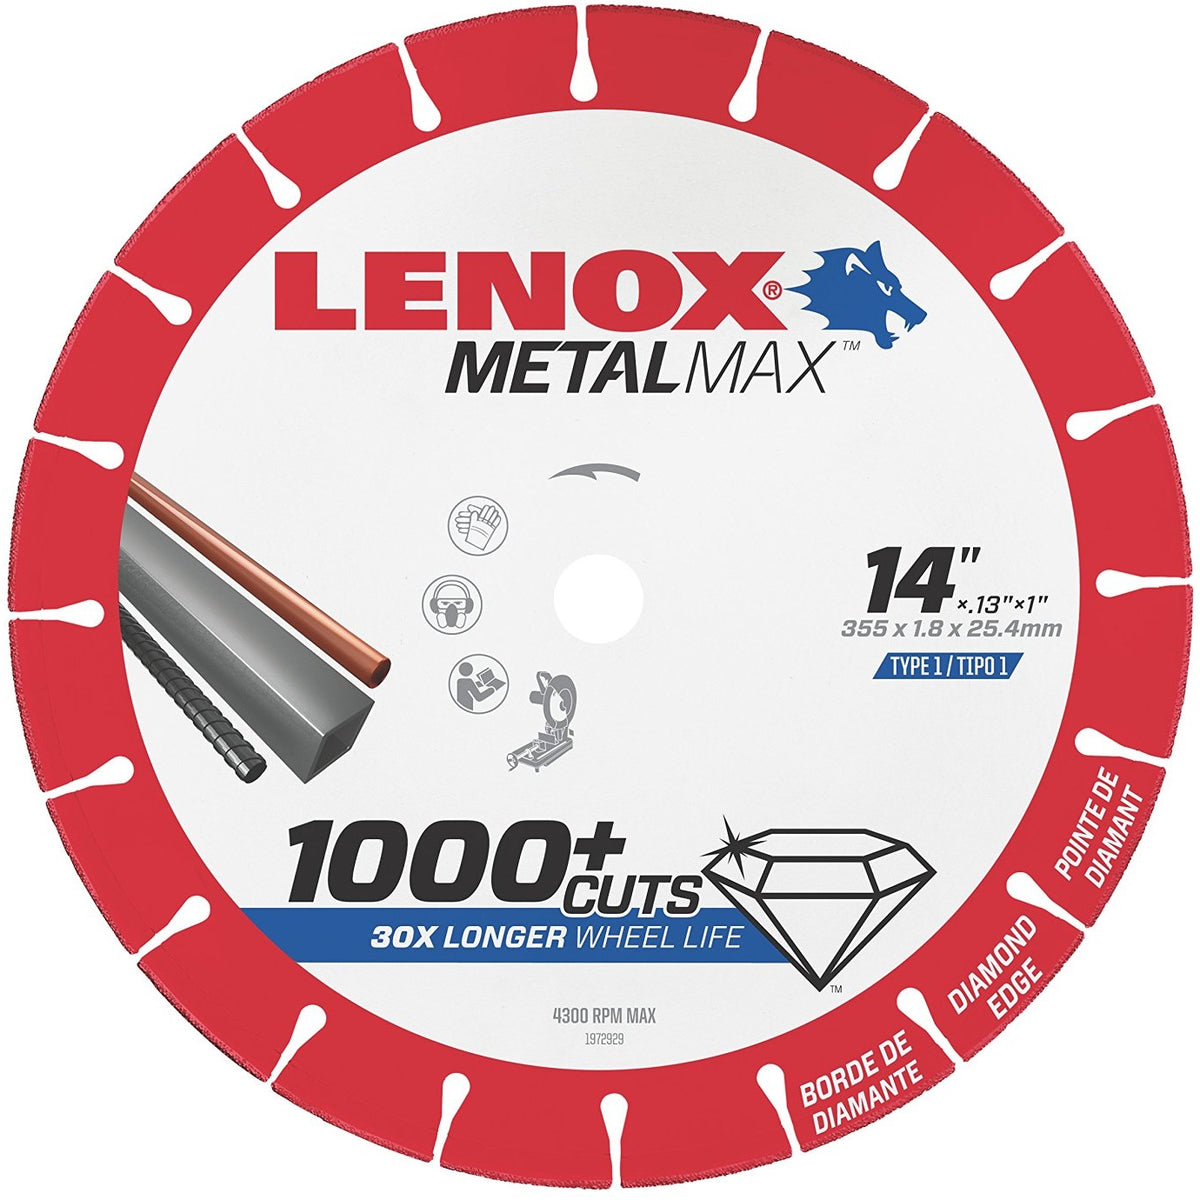 Buy lenox 1972929 - Online store for power tool accessories, diamond in USA, on sale, low price, discount deals, coupon code